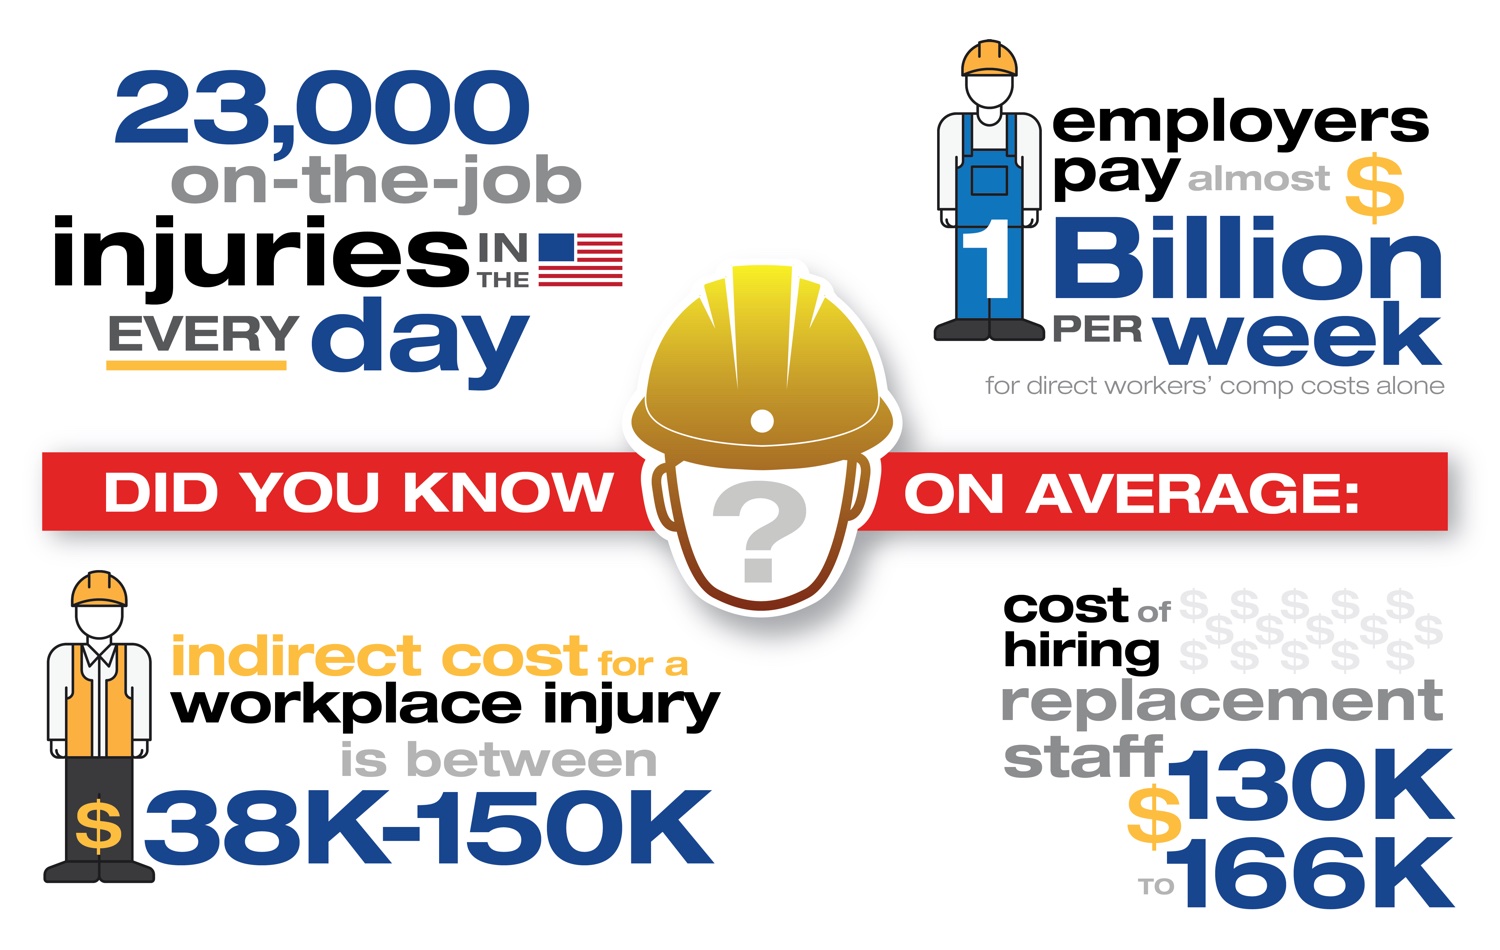 The cost of workplace injuries